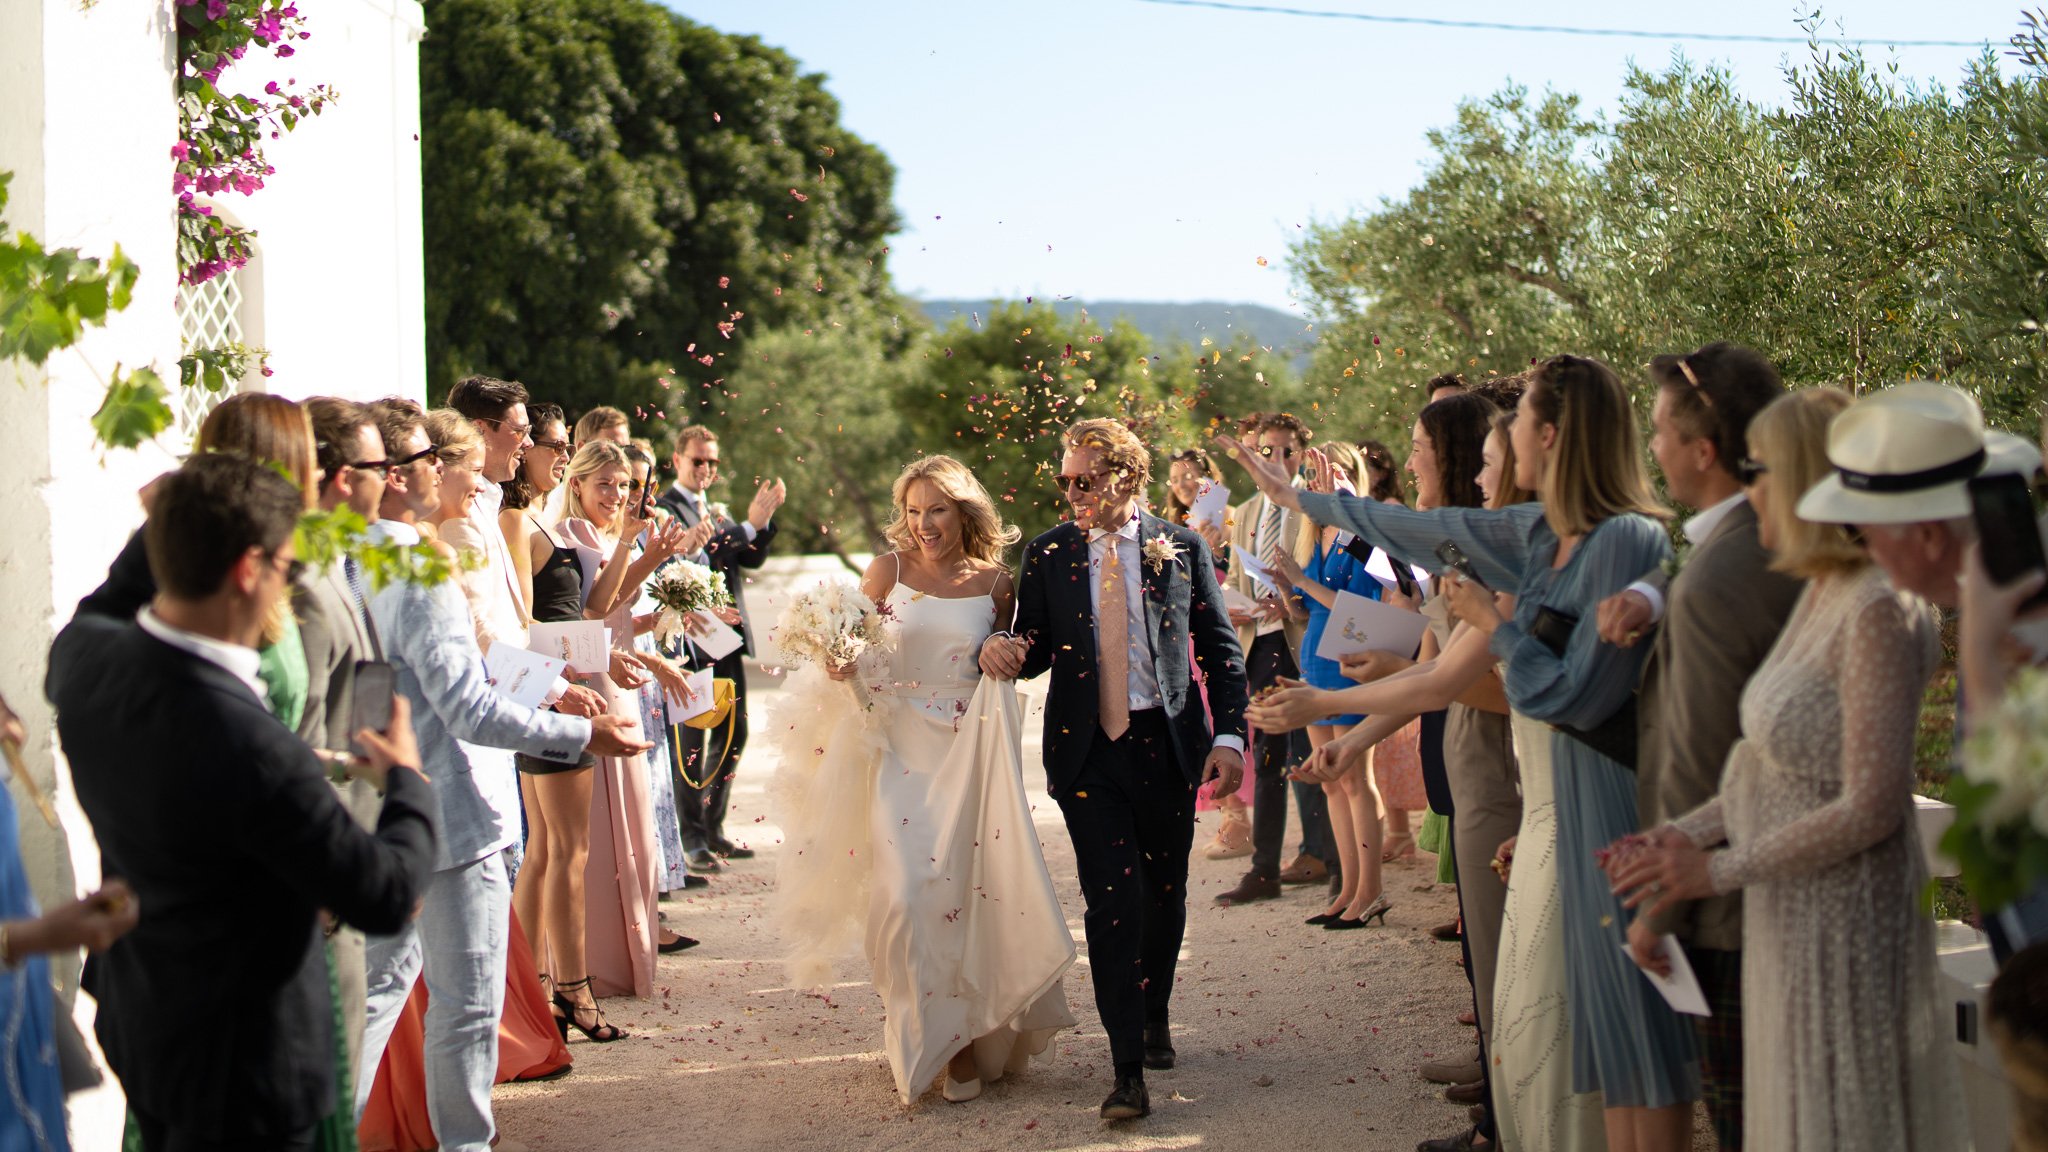 Beautiful bride Rosie wore the Thea wedding dress, Soft Dandelion veil and Ariel bow by Halfpenny London for a destination wedding in Puglia